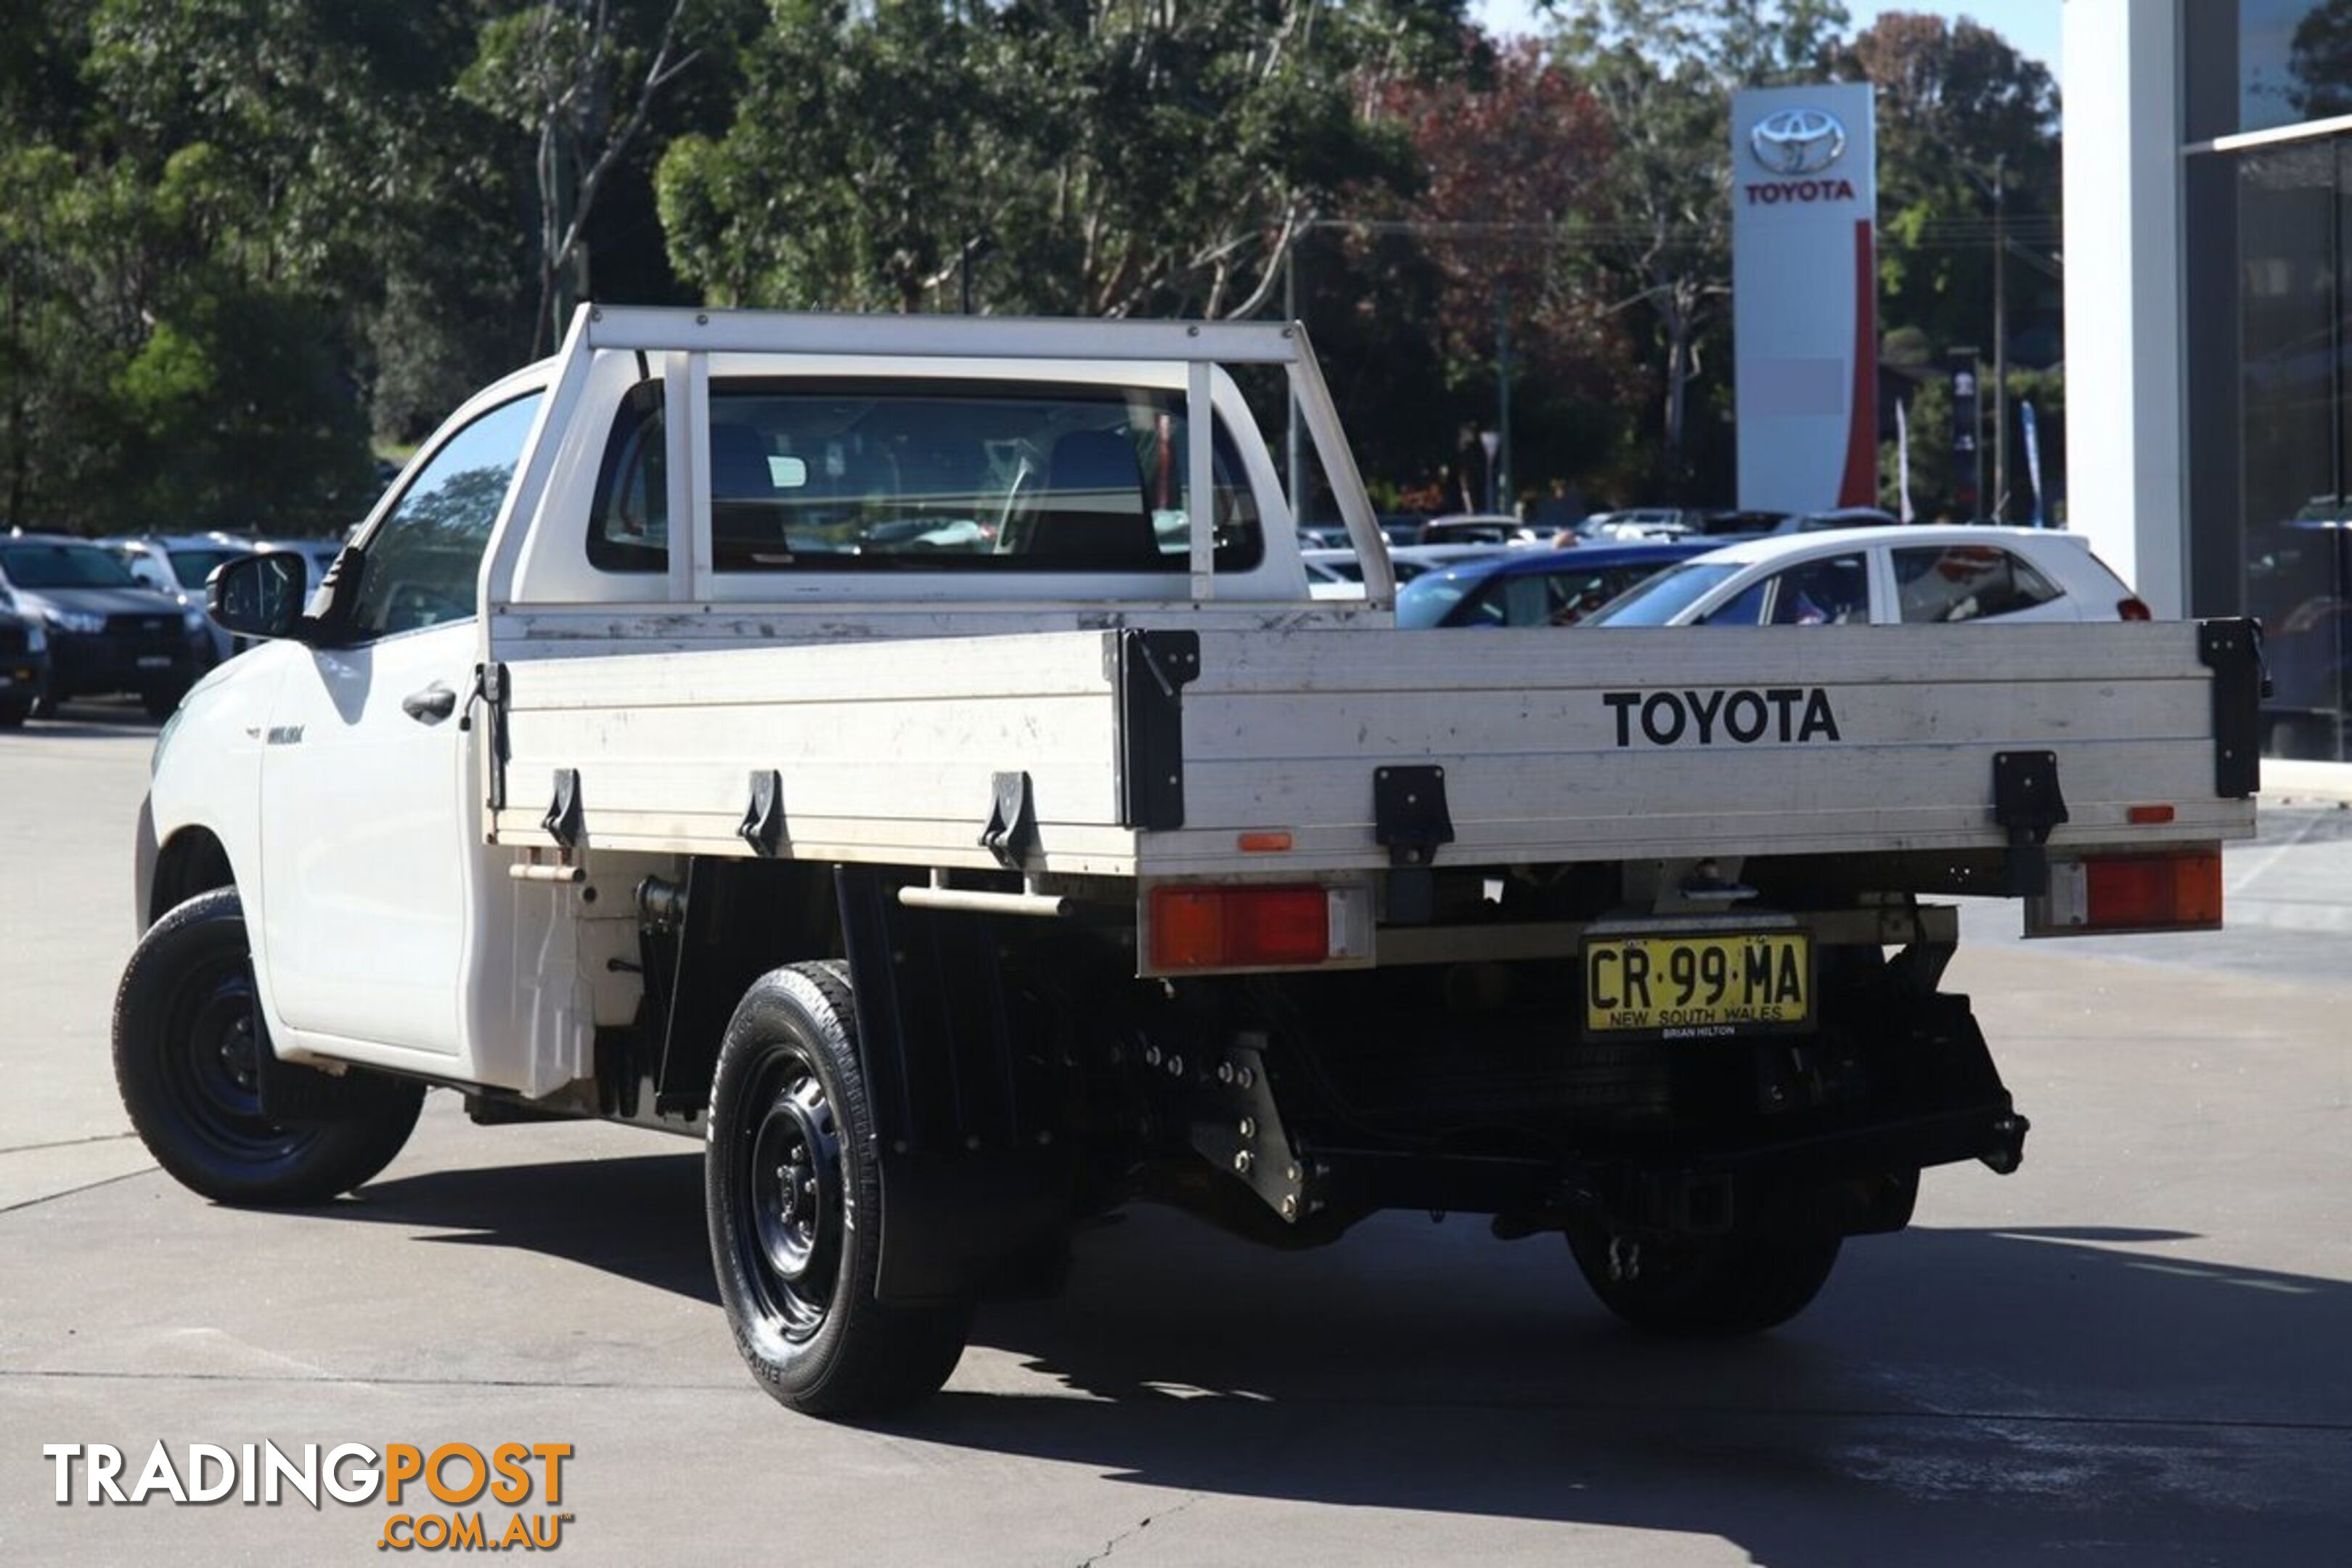 2018 TOYOTA HILUX WORKMATE TGN121R CAB CHASSIS - SINGLE CAB